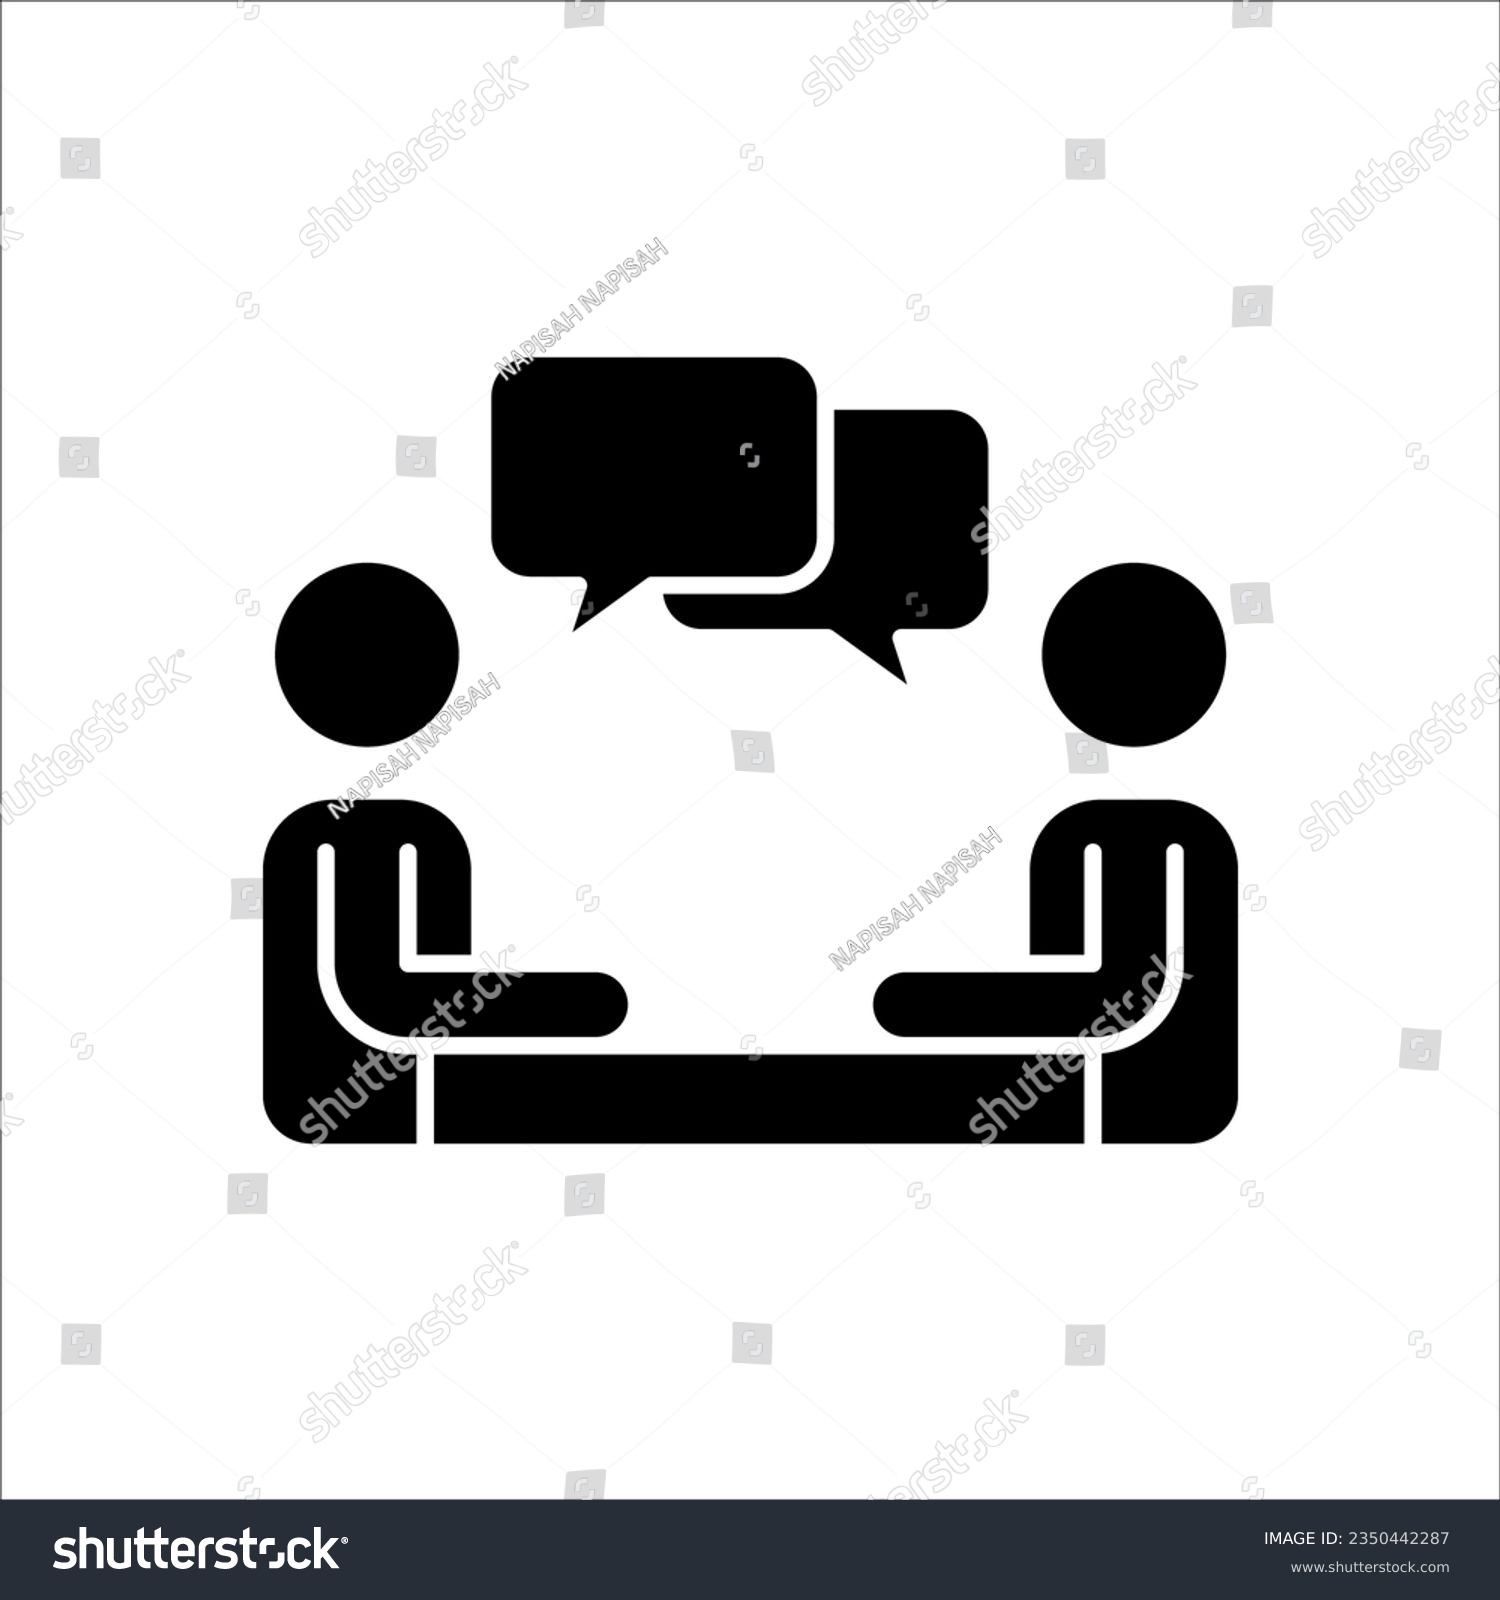 SVG of Brainstorming and teamwork icon. Business meeting. Debate team. Discussion group. People in conference room sitting on white background svg